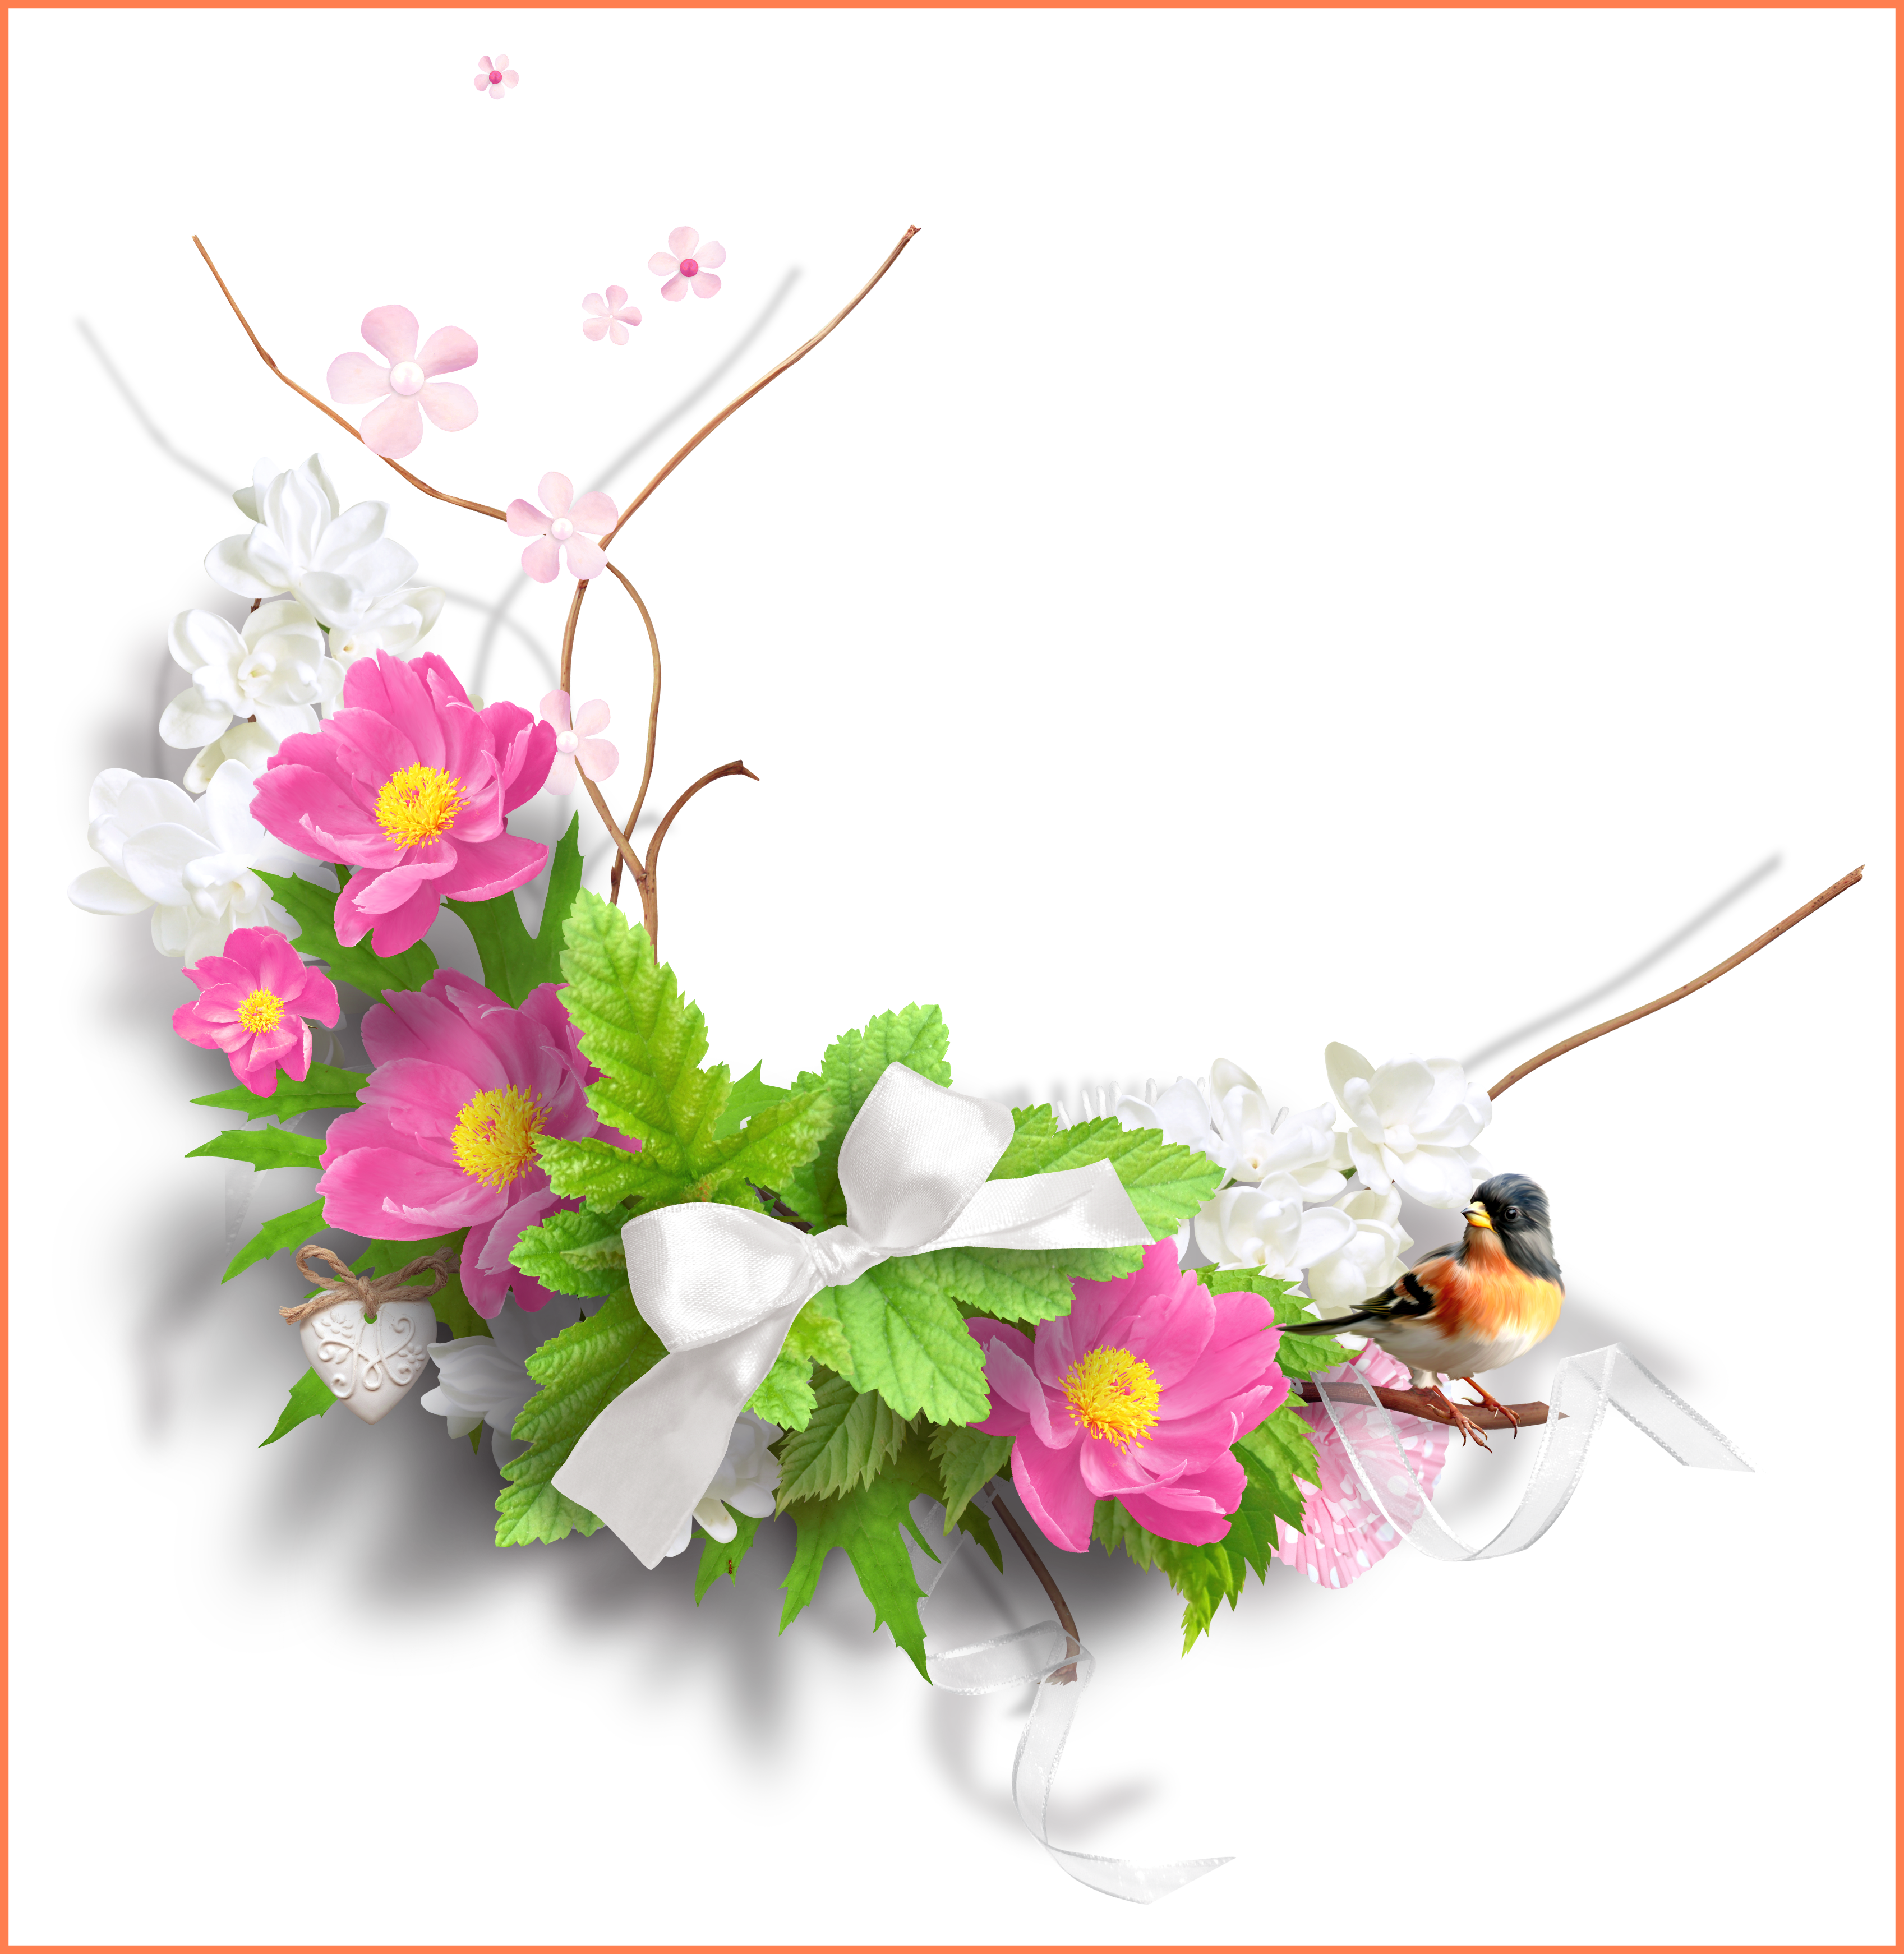 decoration clipart spring